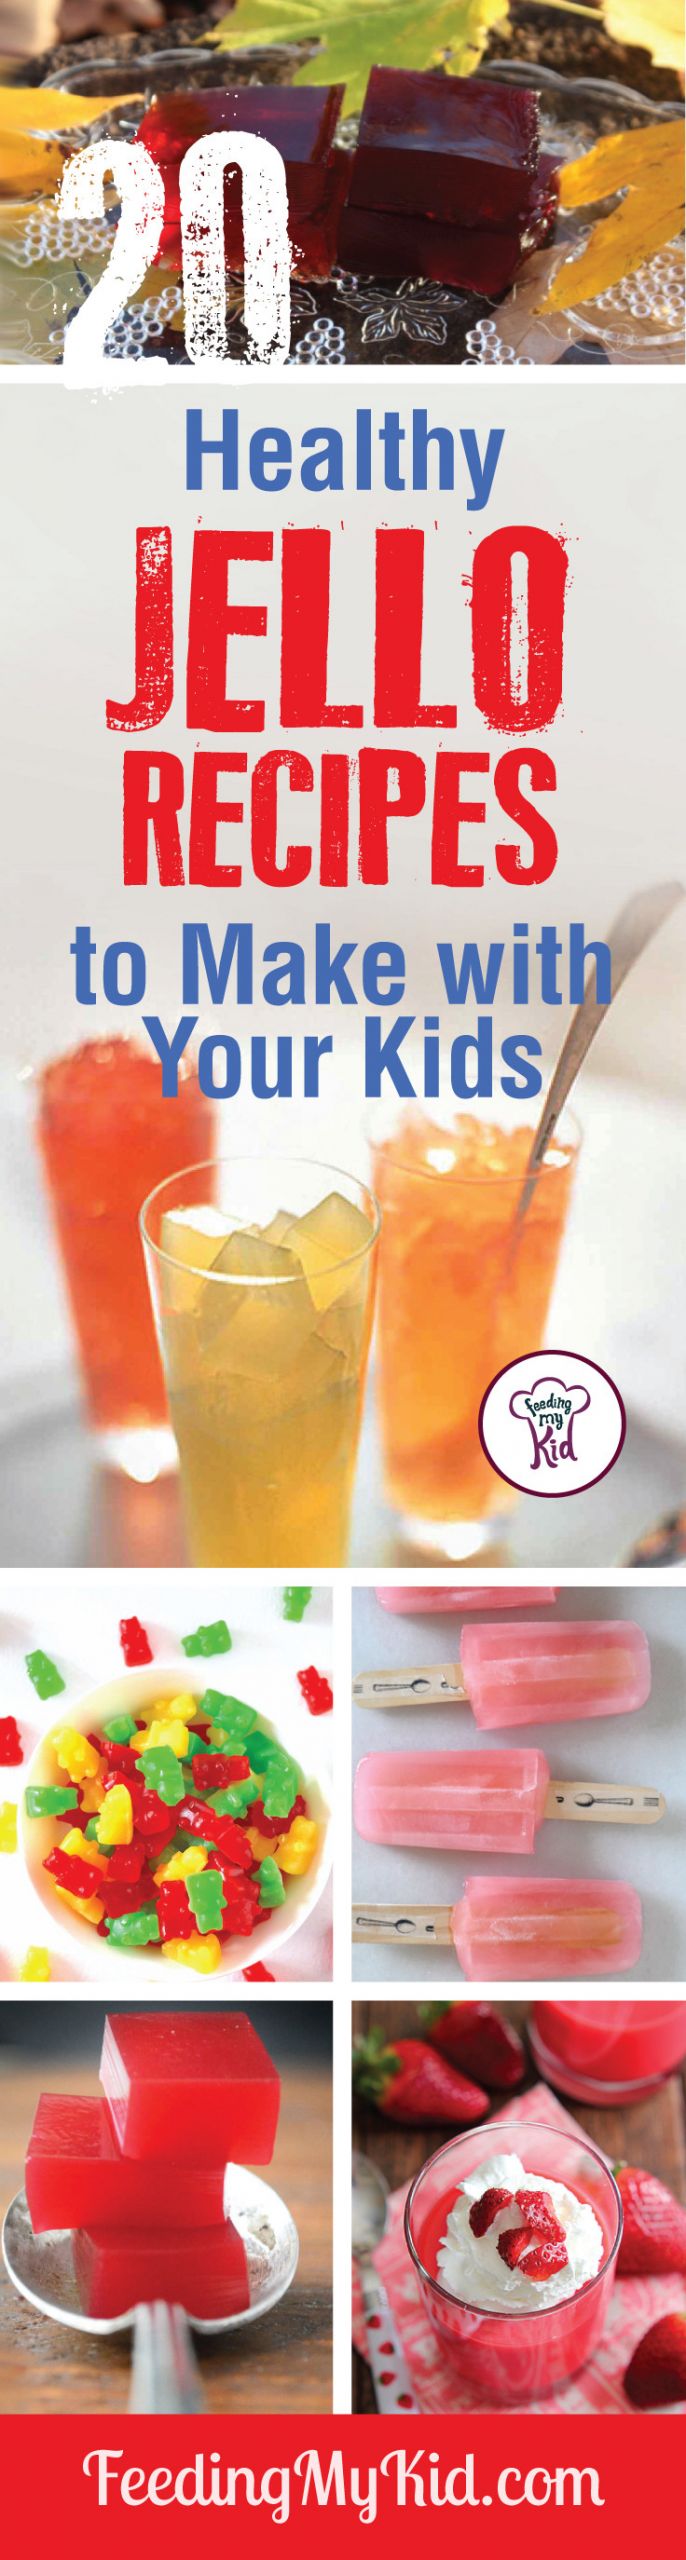 Jello Recipes For Kids
 Jello Recipes Easy and Healthy Snacks to Make with Your Kids